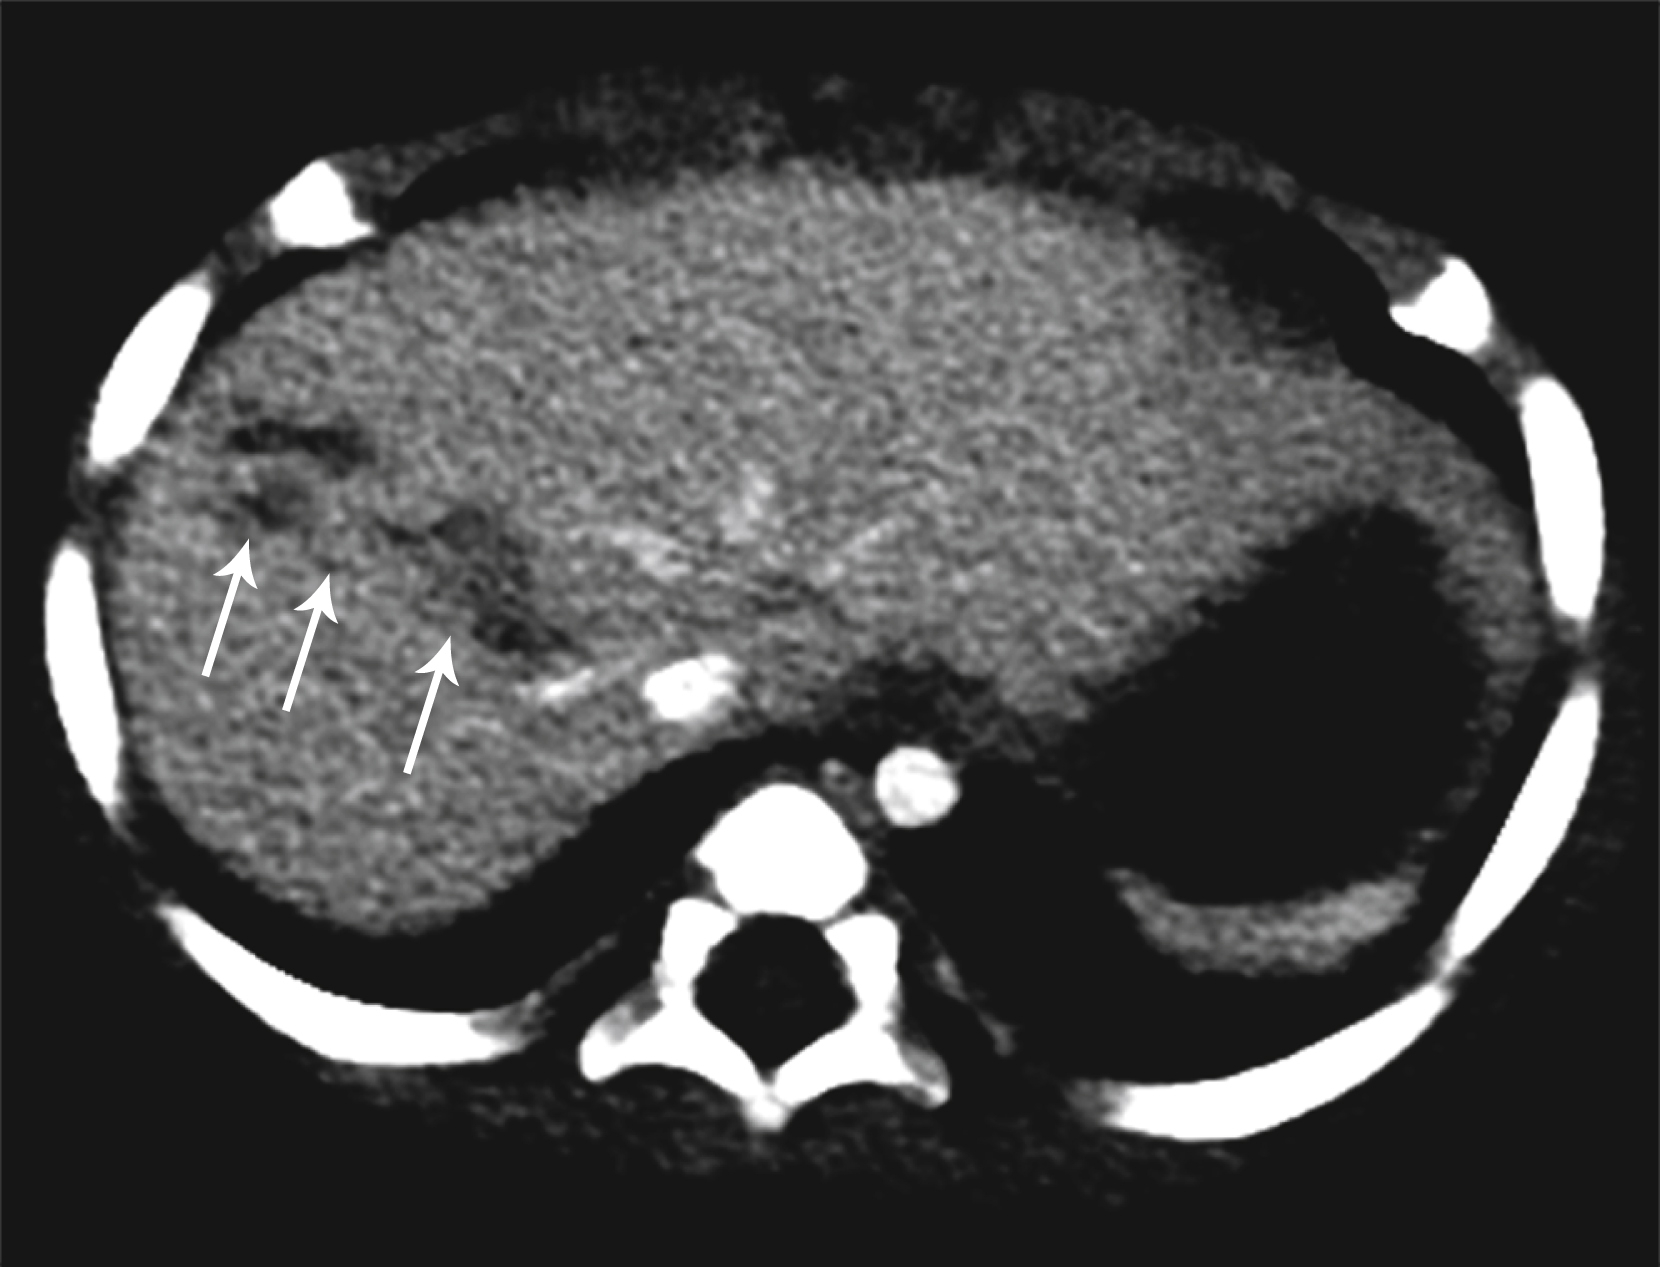 Fig. 21.6, A 5-month-old with multiple fractures (not shown) and elevated liver enzymes. Although suspected abuse patients may have benign abdominal examinations, referring clinicians will often perform laboratory tests to determine whether they need to do abdominal imaging.